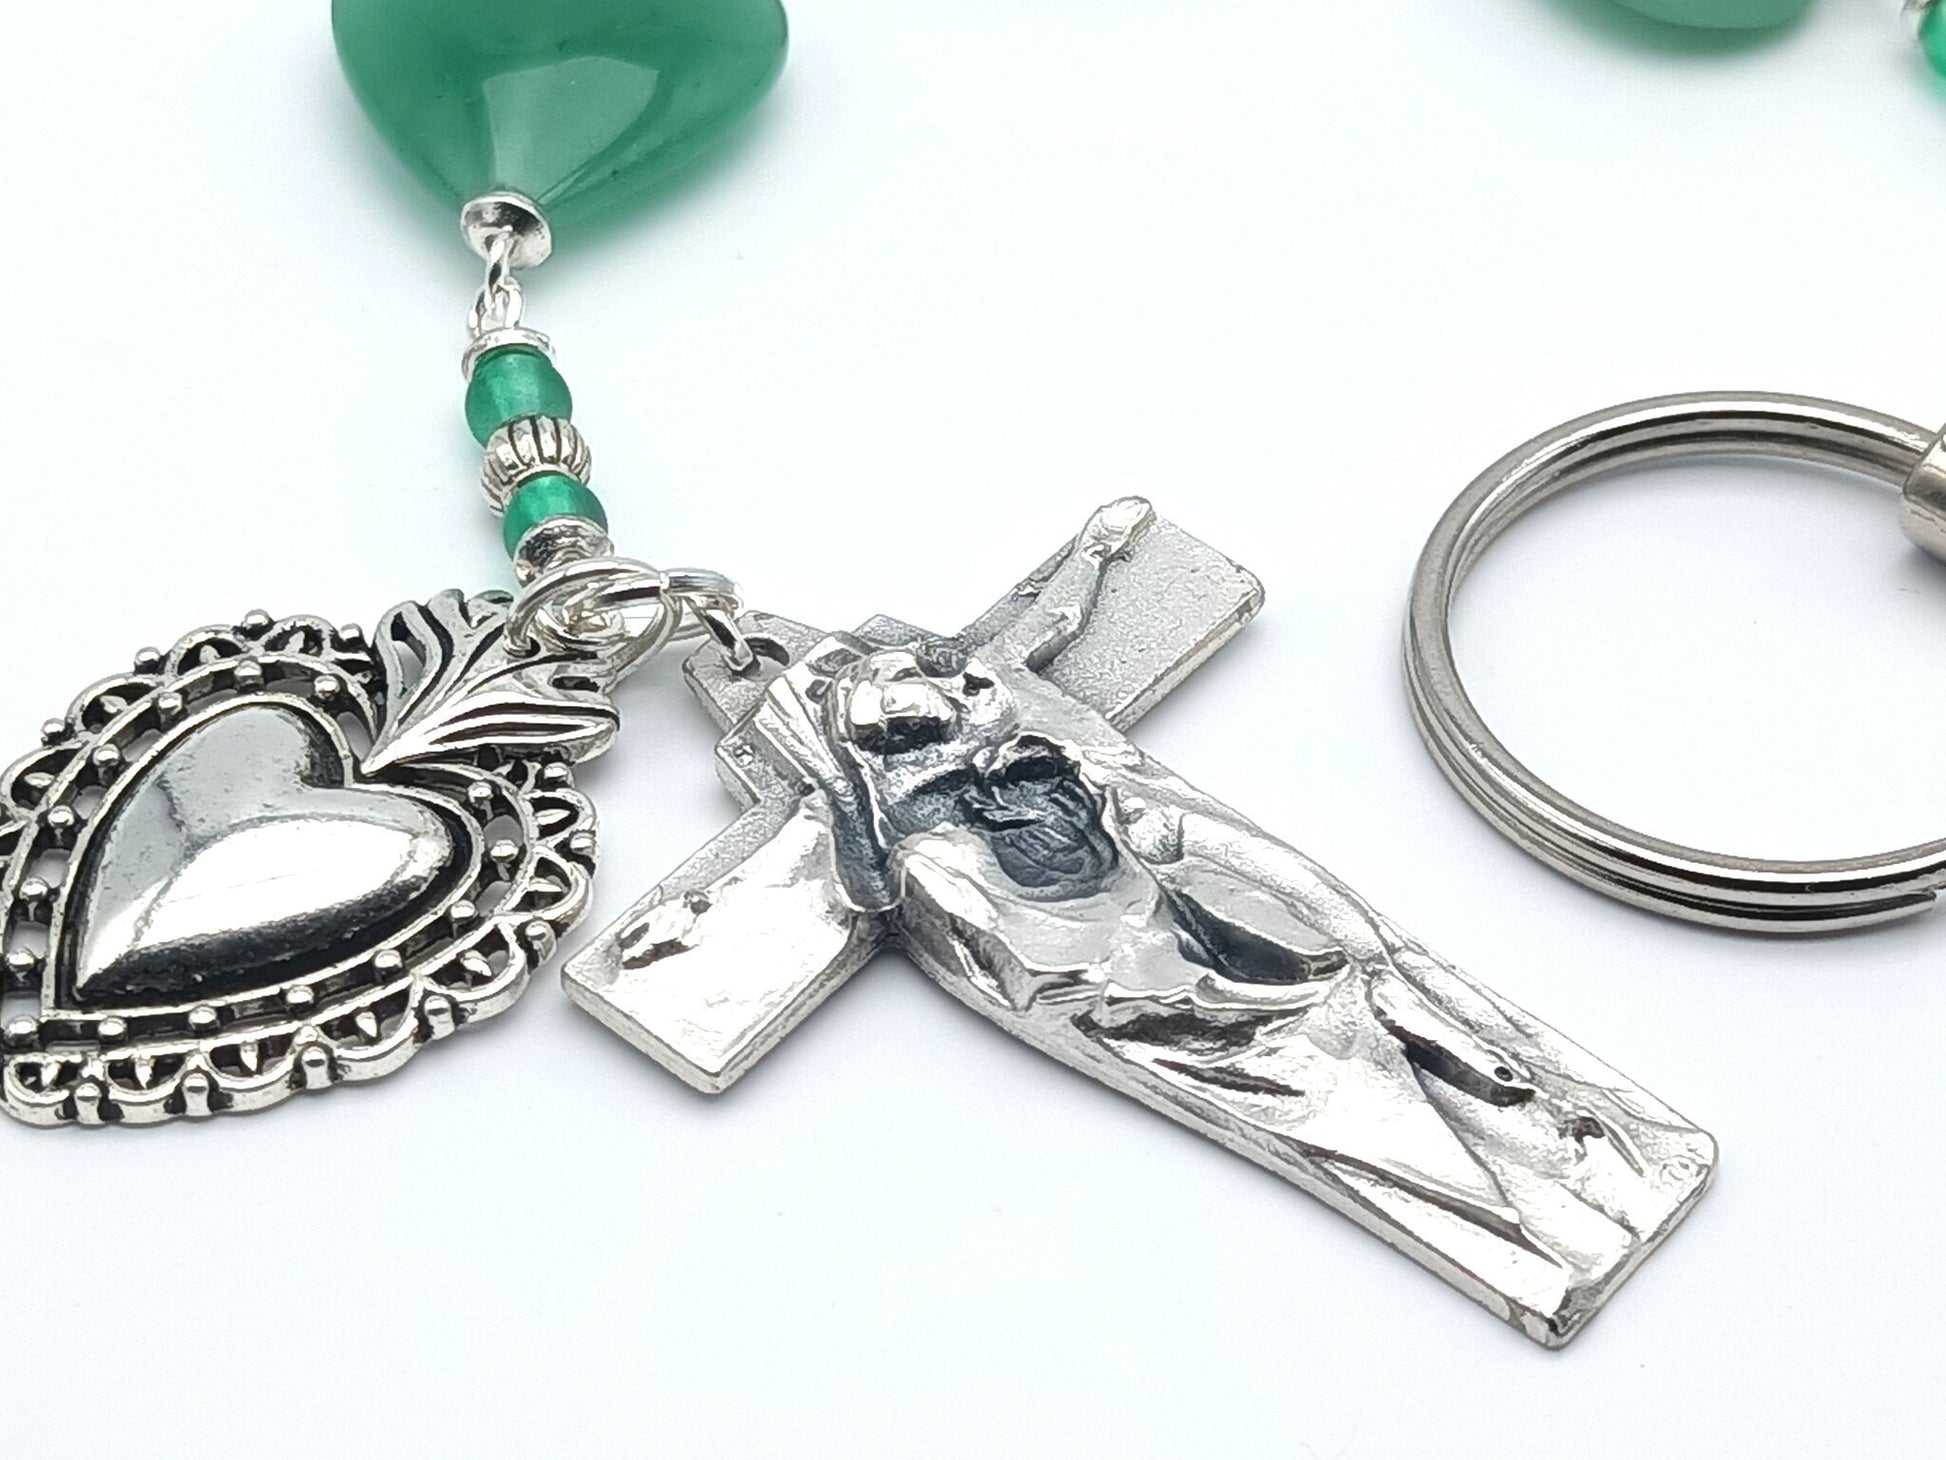 Three Hail Mary unique rosary beads chaplet with green gemstone beads, silver Our Lady of Sorrows crucifix and scared heart of Jesus medal.